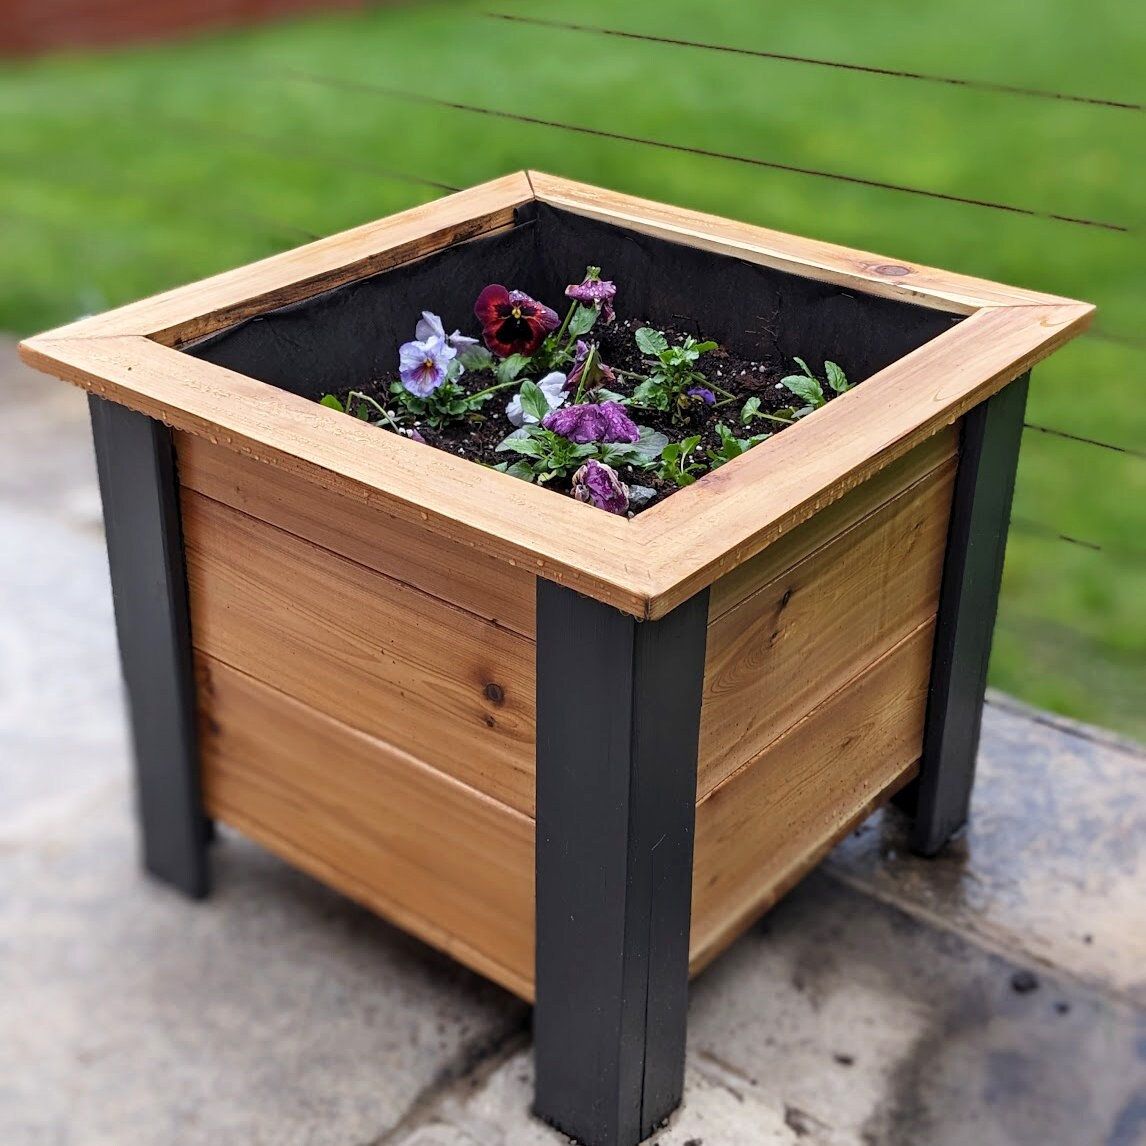 Diy Wooden Planters for Your Garden